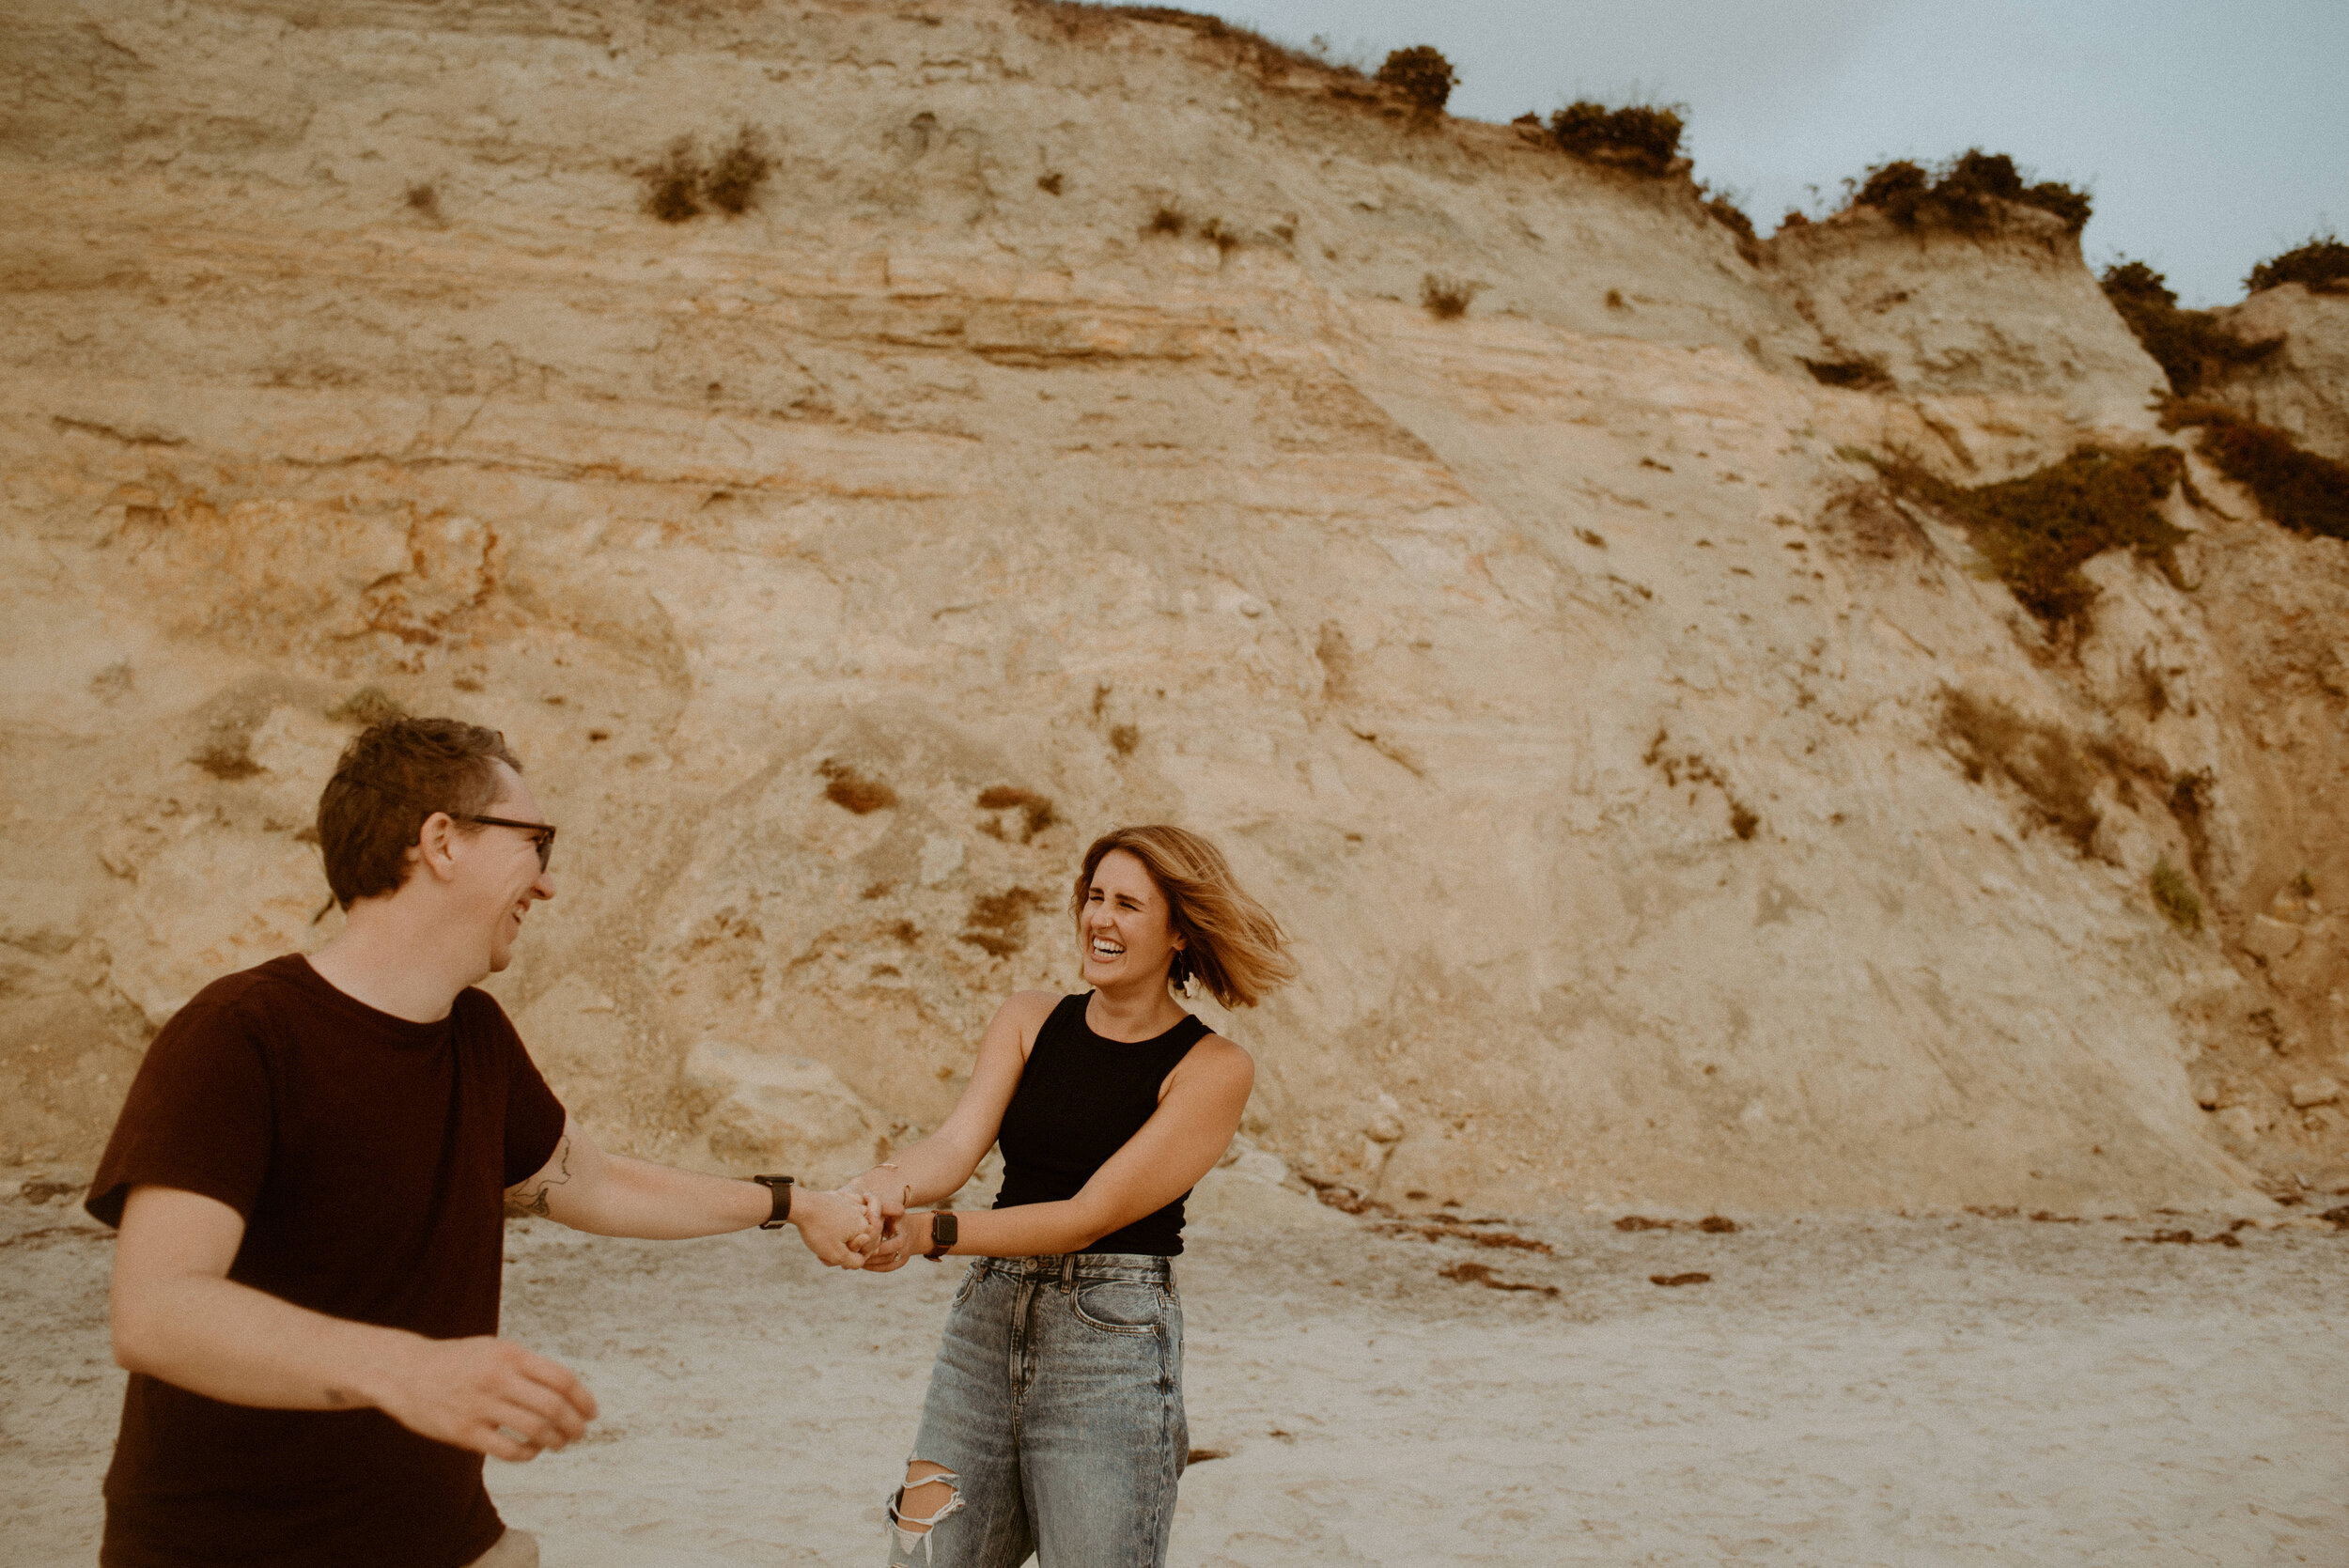 Torrey Pines Couples Photos | San Diego Beach Engagement Session 